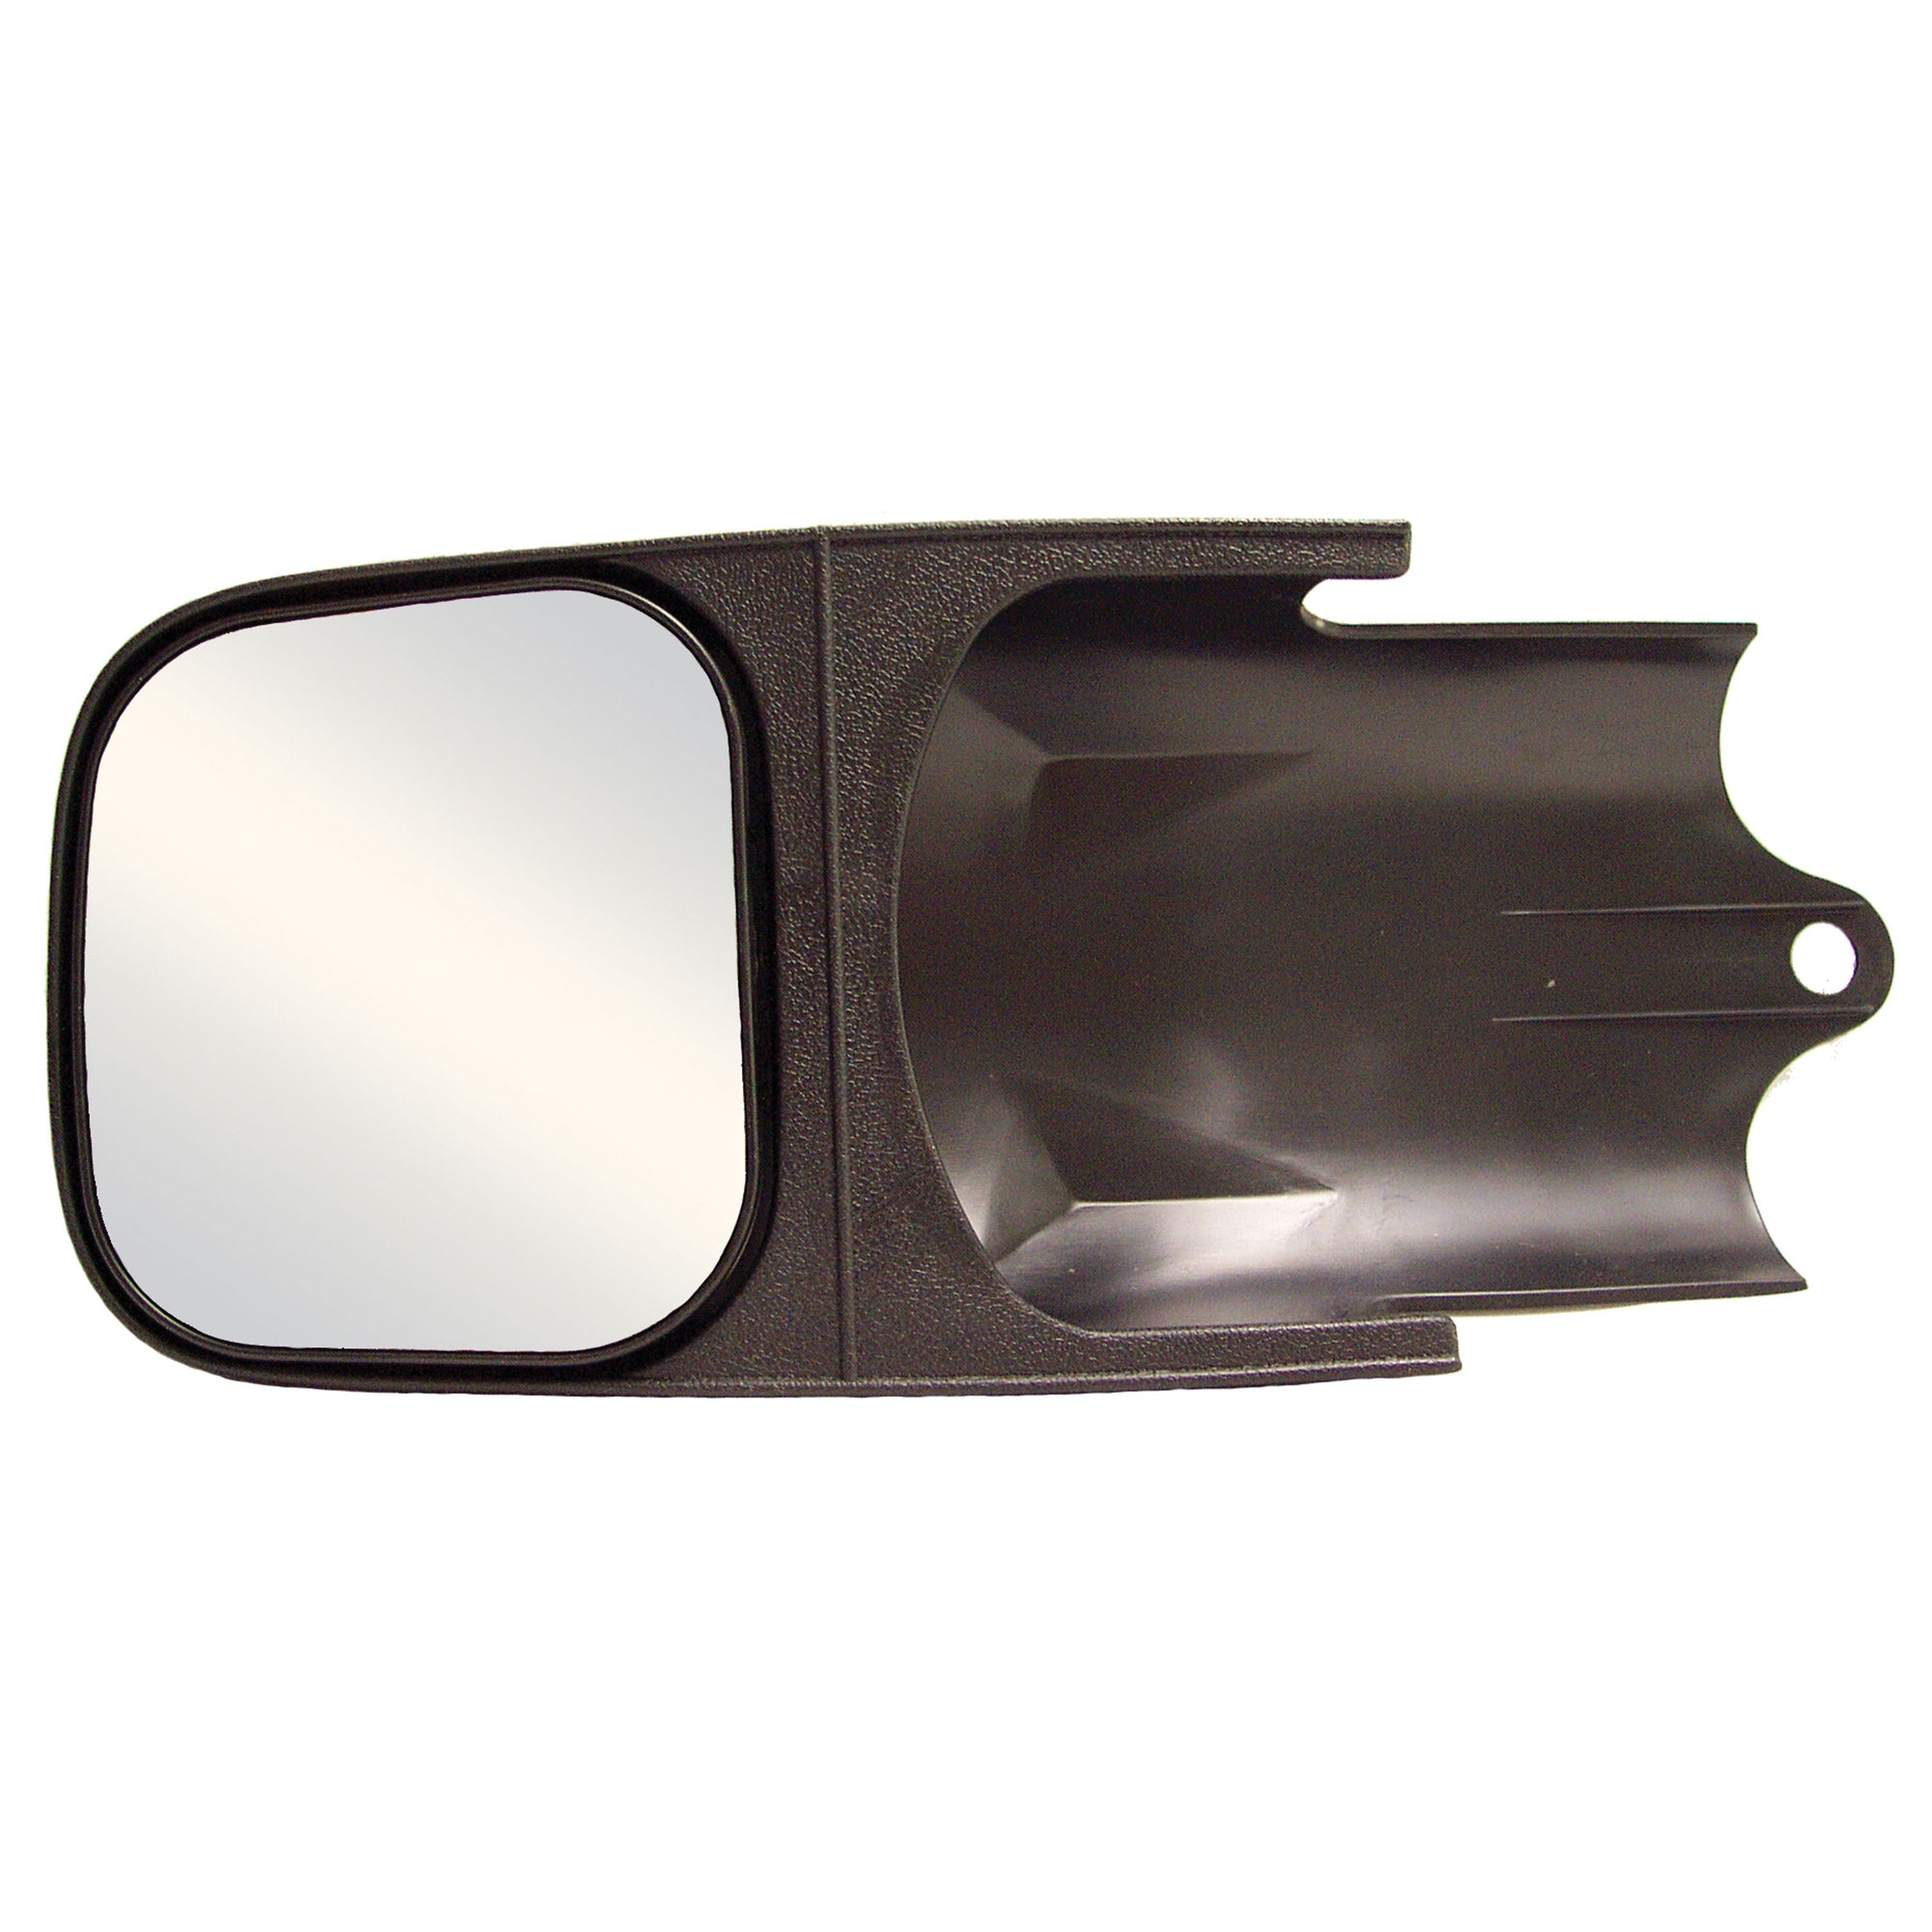 CIPA 11000 Custom Towing Mirror for Ford Ranger and Chevy/GMC S10 & S15